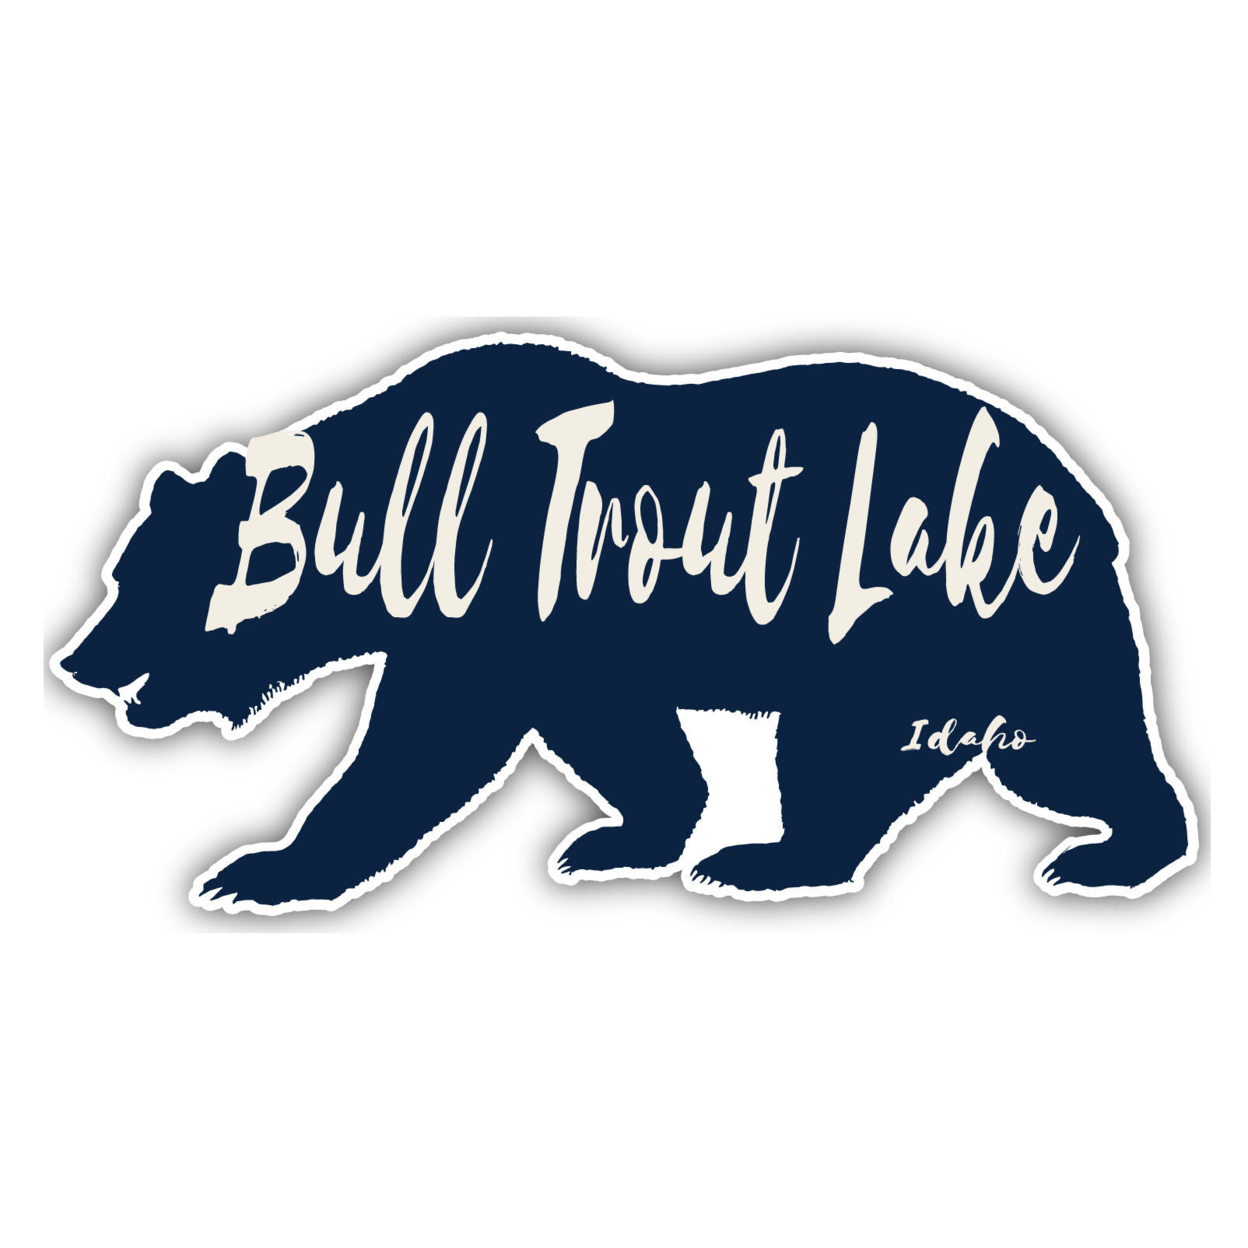 Bull Trout Lake Idaho Souvenir Decorative Stickers (Choose Theme And Size) - 4-Pack, 2-Inch, Bear